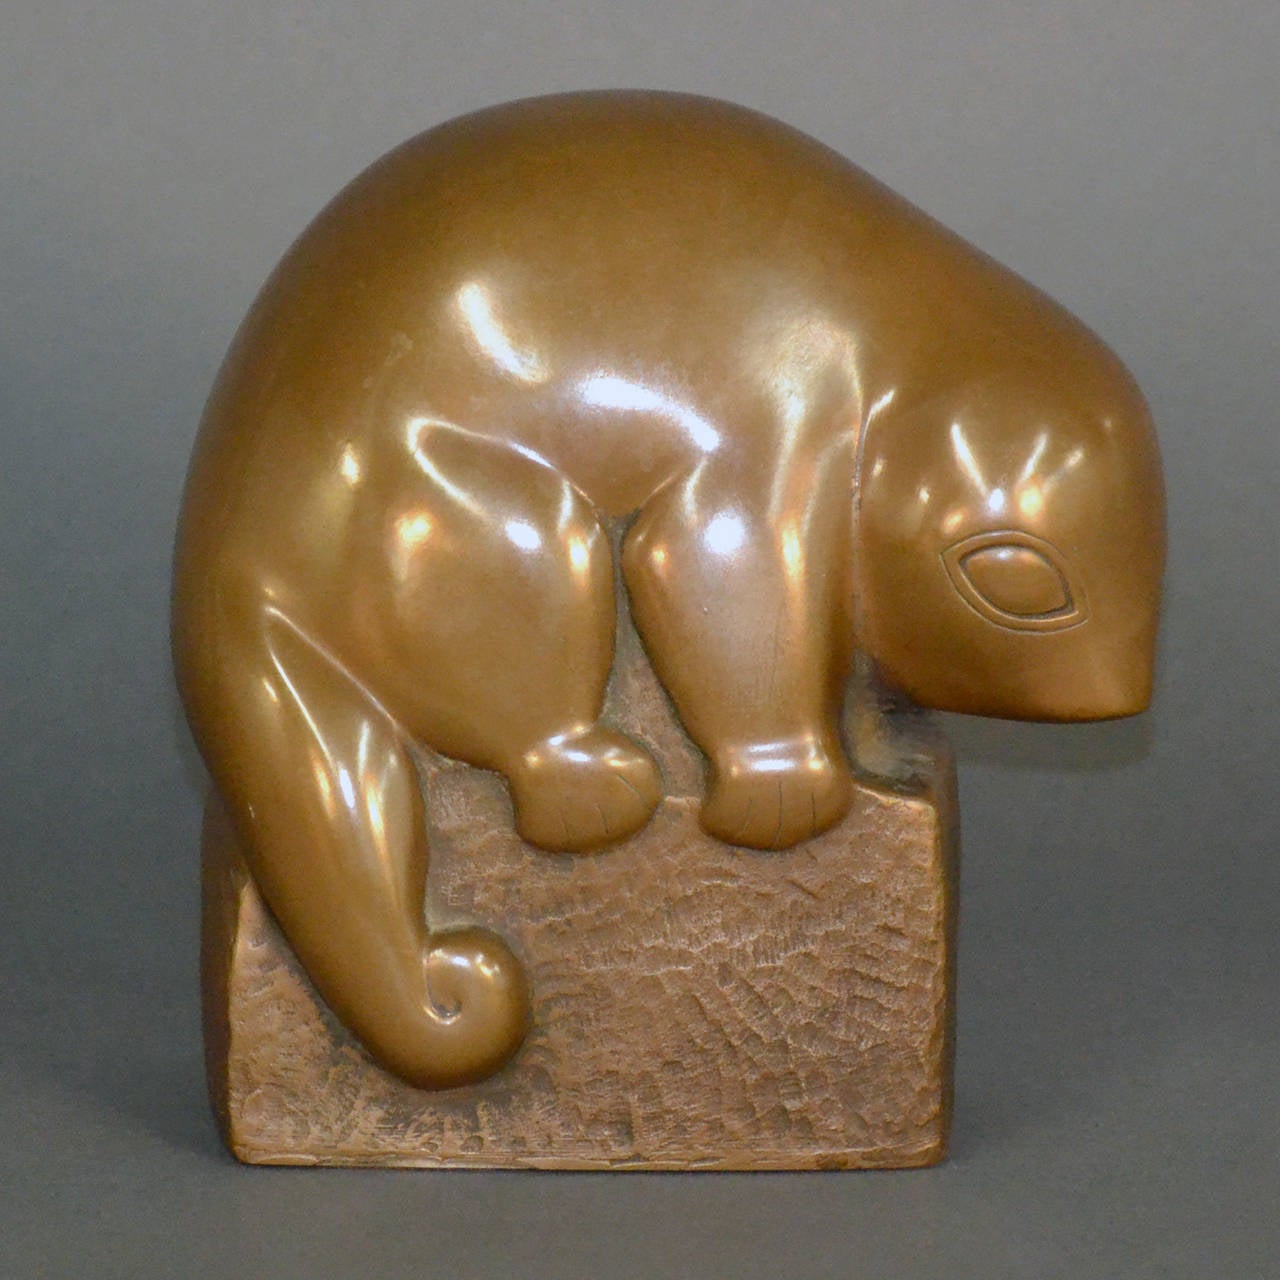 A charming composite cast American sculpture of a baby opossum resting on a hammered block, copyright edition no longer in production, signed Marion Weisberg. The bronze finish of this sculpture has a beautiful warm patina.